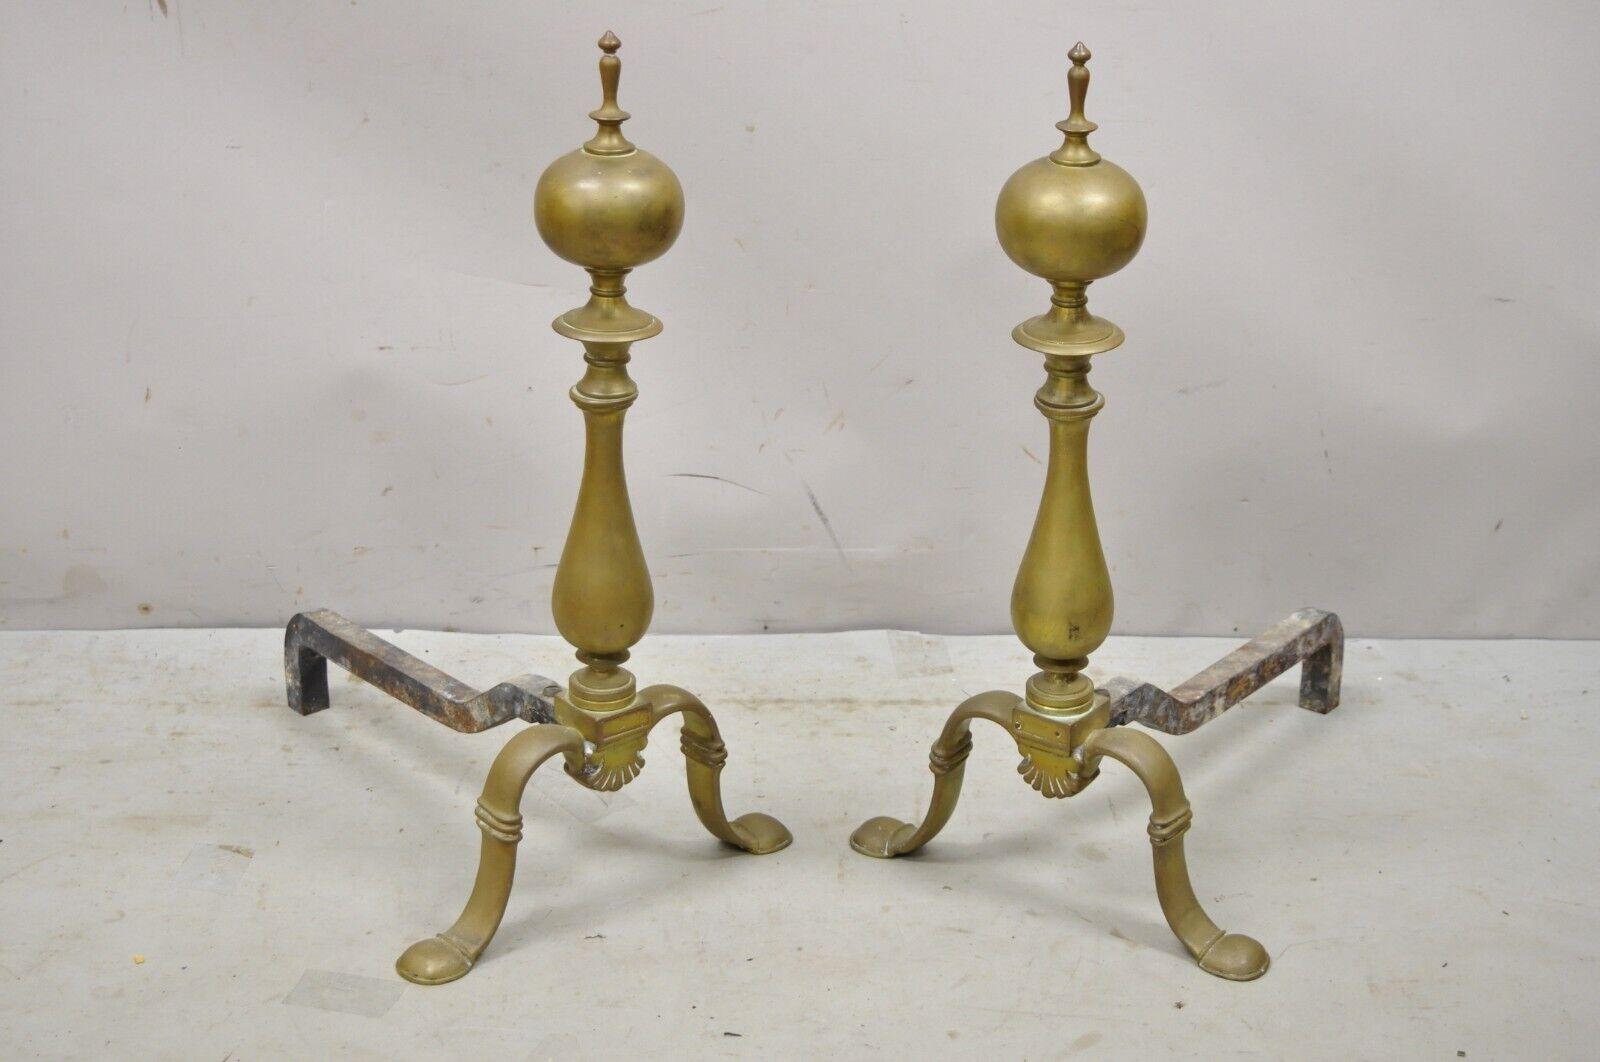 Antique Federal brass cannonball cast iron fireplace Hearth Andirons - a Pair. Item features solid brass construction, shapely legs, cast iron supports, very nice antique pair, quality craftsmanship, great style and form. circa 19th century.